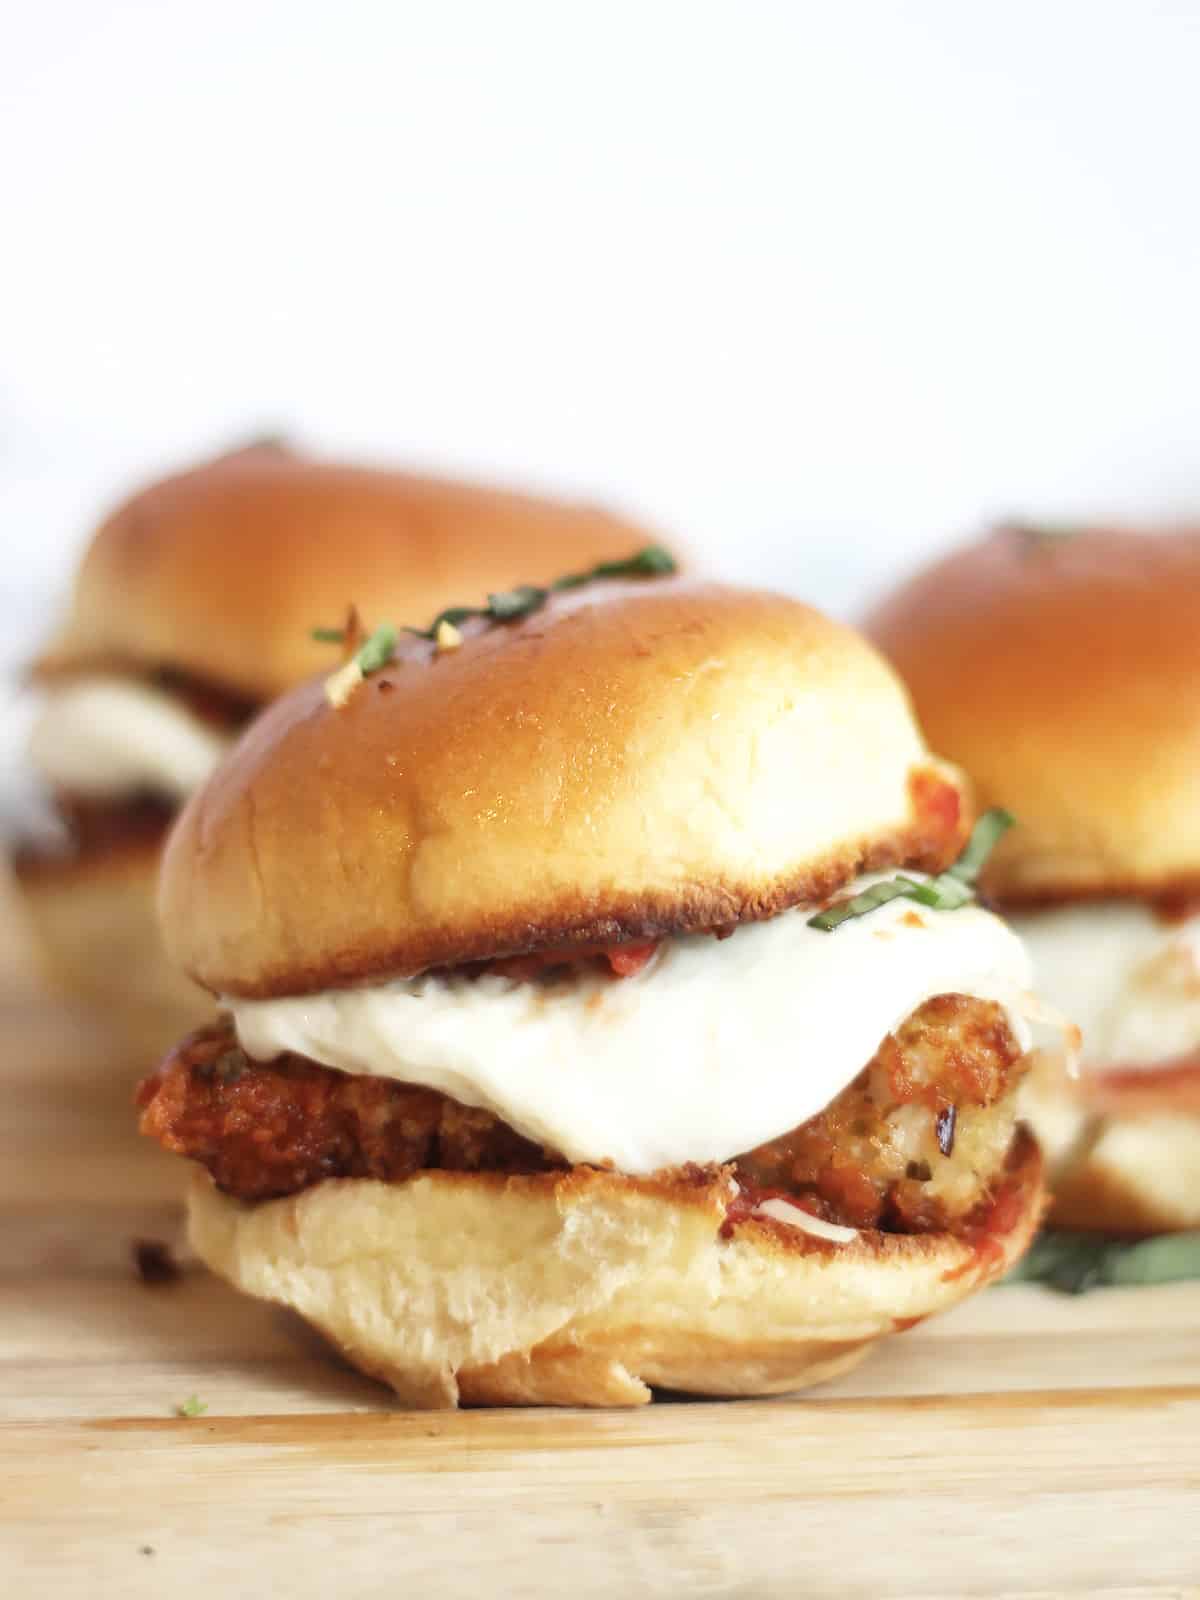 A slider with crispy chicken and melted mozzarella.